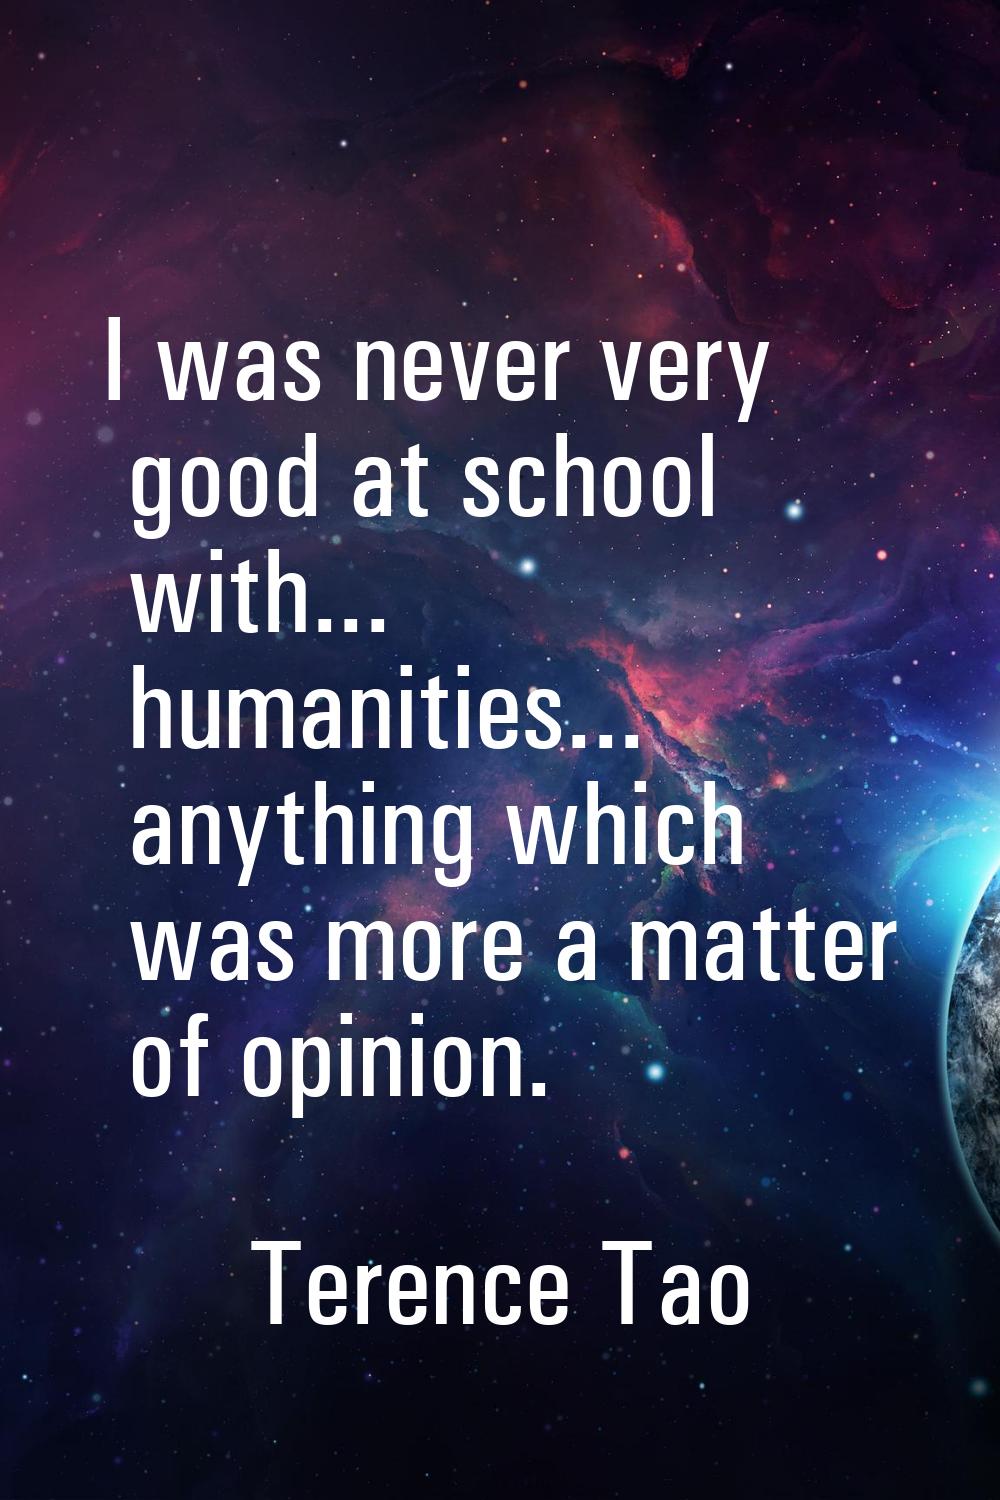 I was never very good at school with... humanities... anything which was more a matter of opinion.